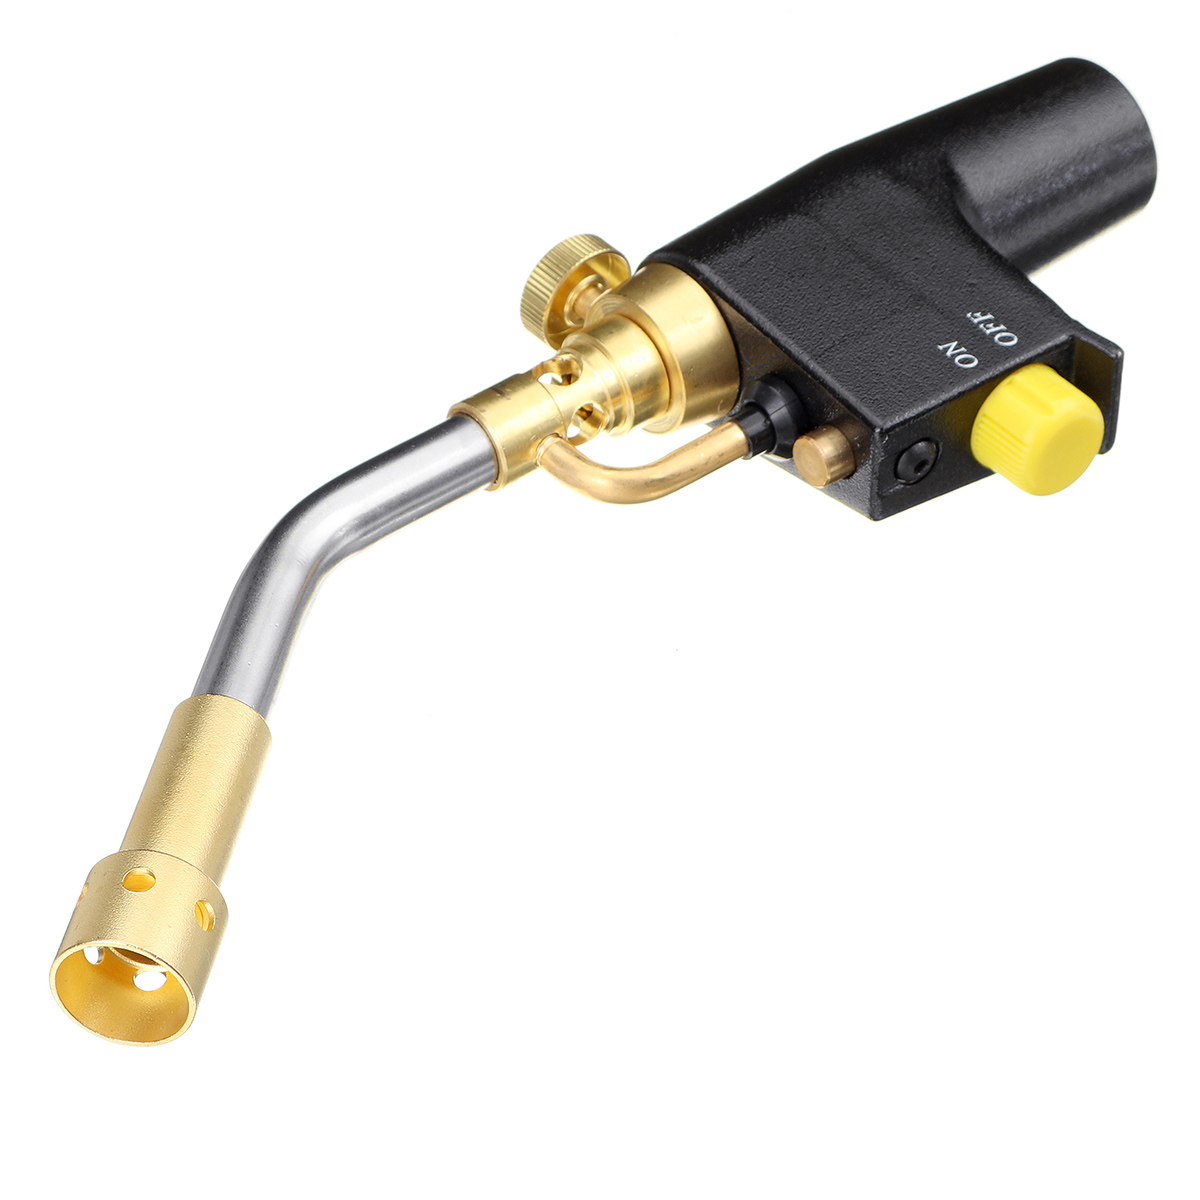 TS8000-Type-High-Temperature-Brass-Mapp-Gas-Torch-Propane-Welding-Pipe-With-a-Replaceable-Brass-Weld-1717065-6